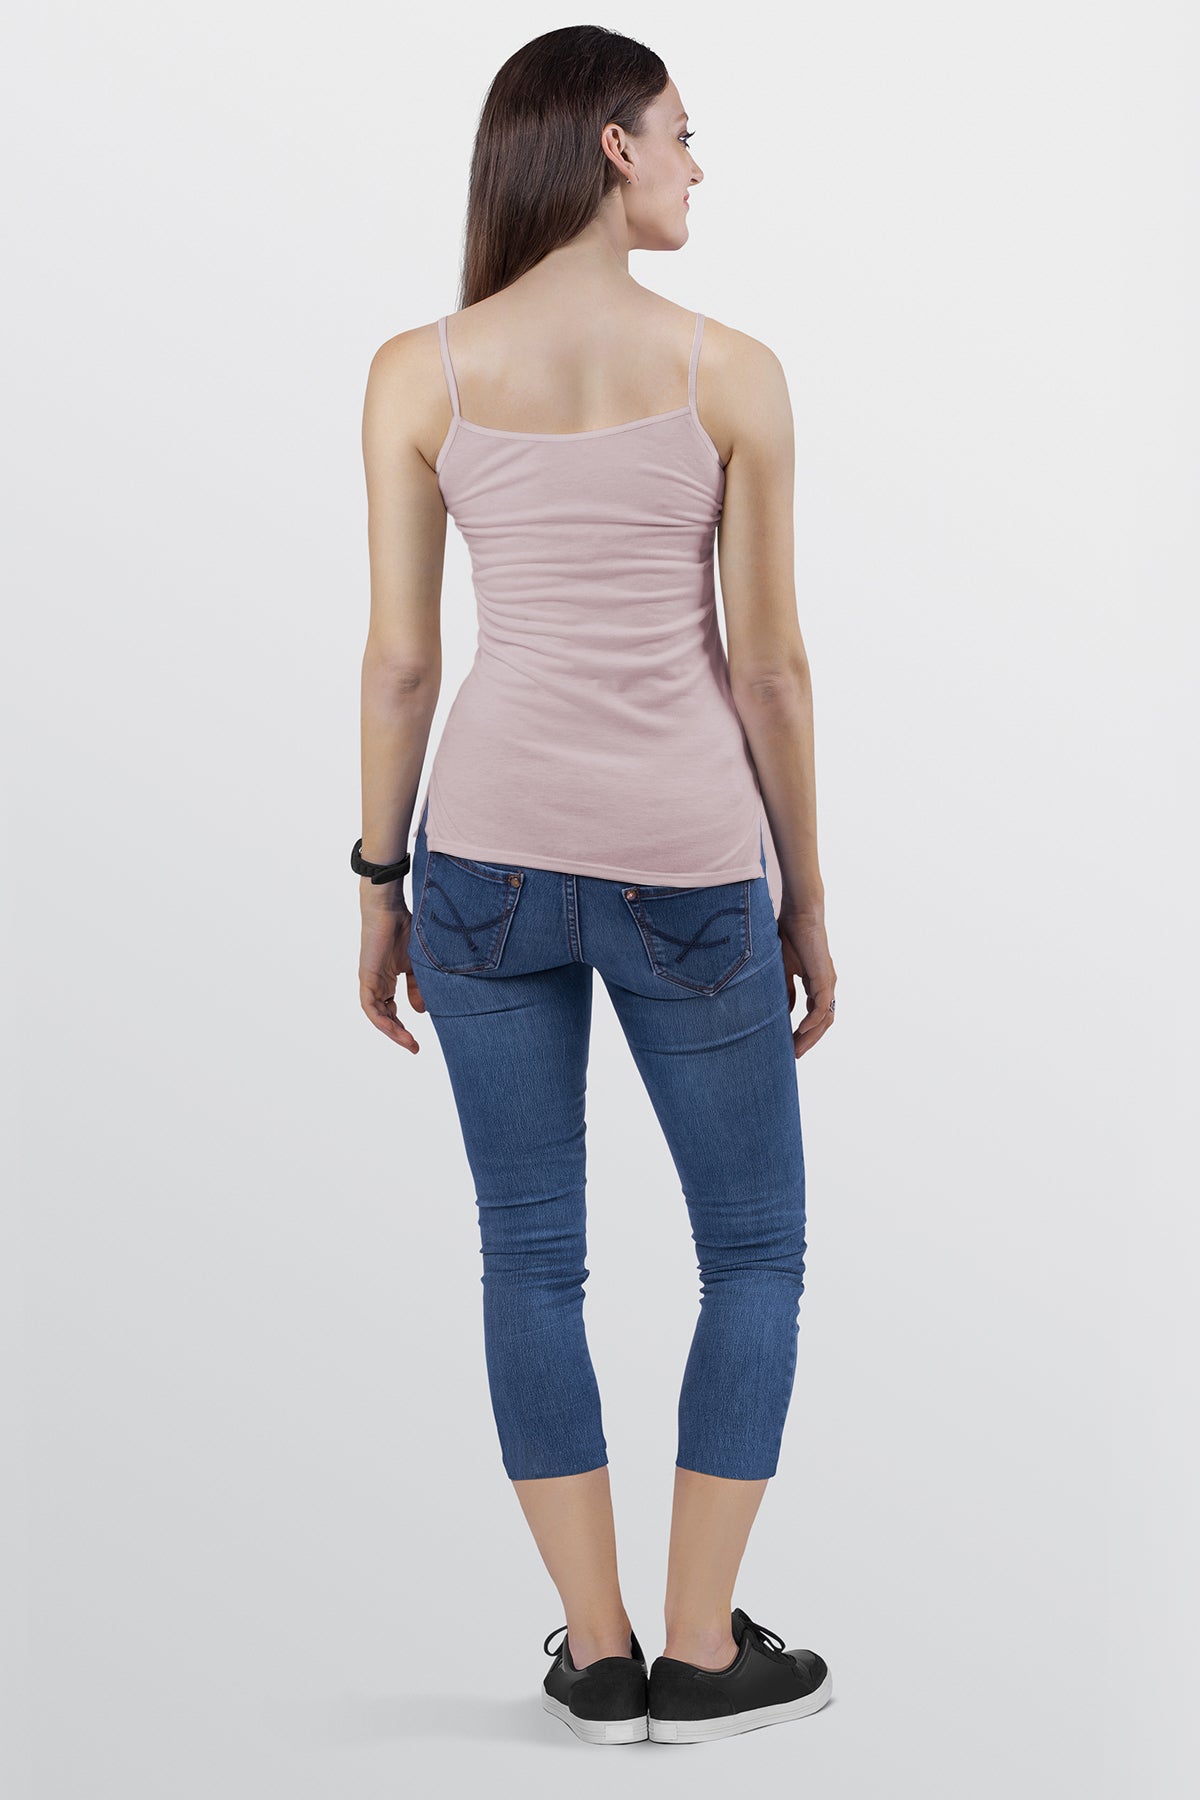 BLS - Colleen Stretchable Cotton Camisole - Pink